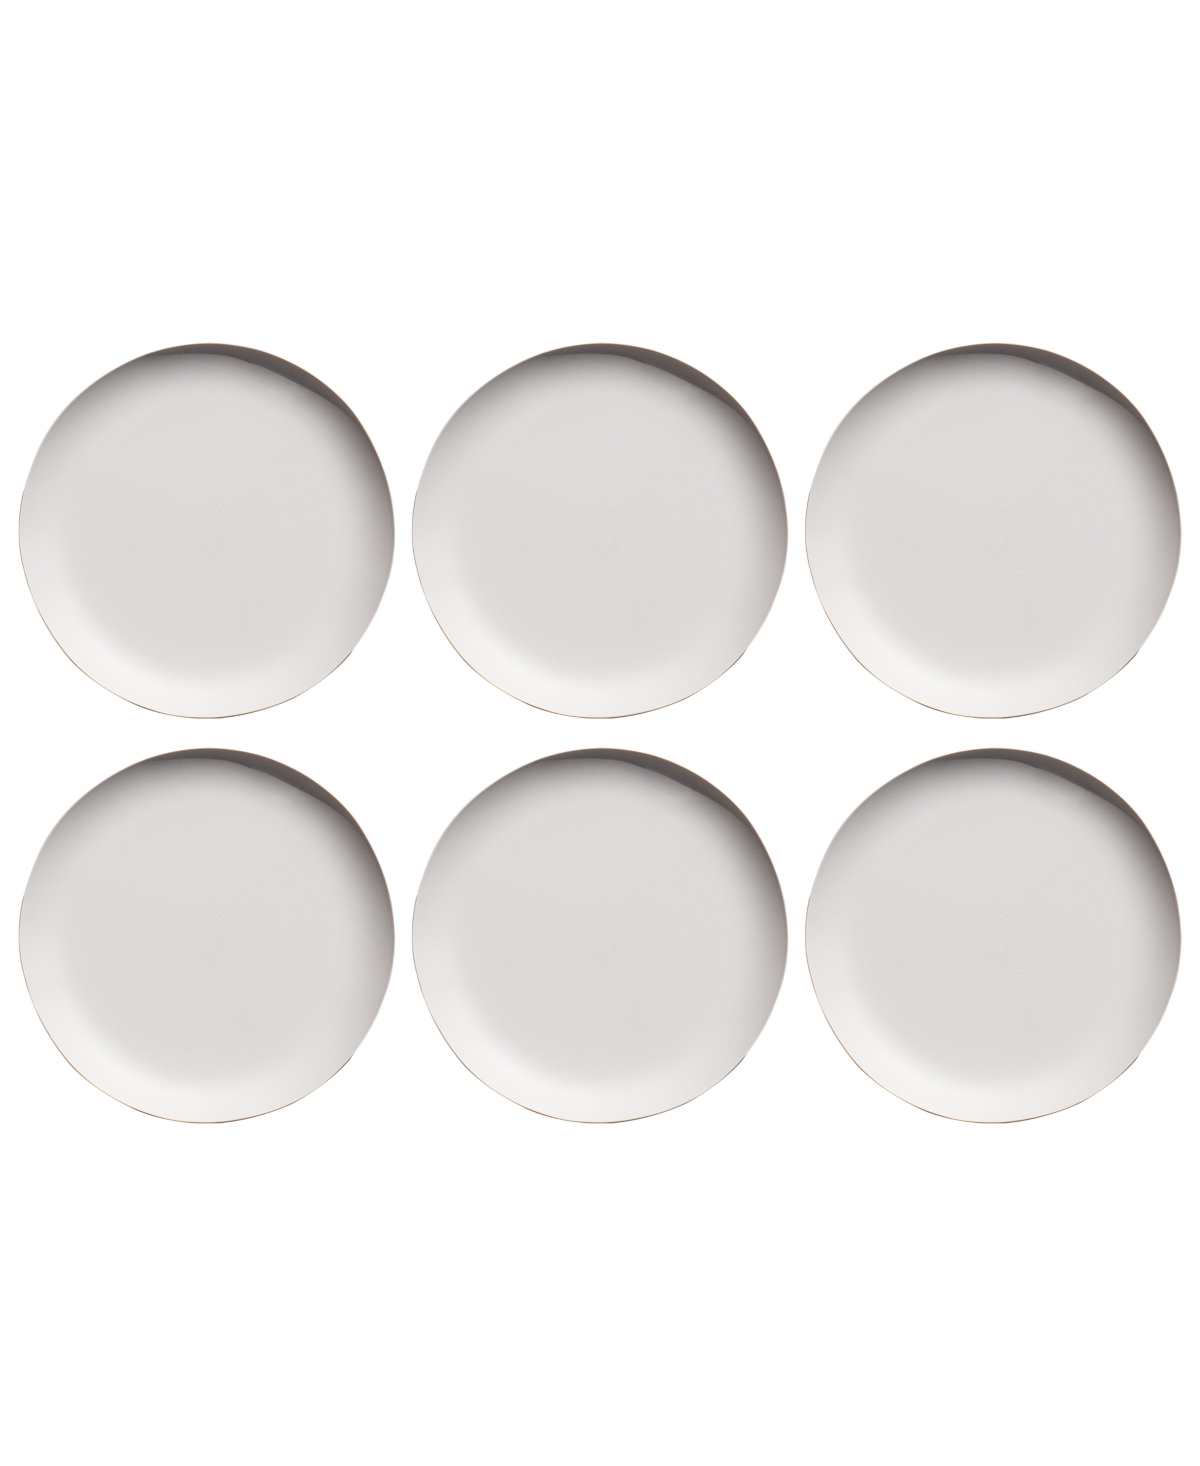 Natureone Craft Soft Matte Finish Coupe 10.4" Dinner Plates, Set of 6, Service for 6 - White